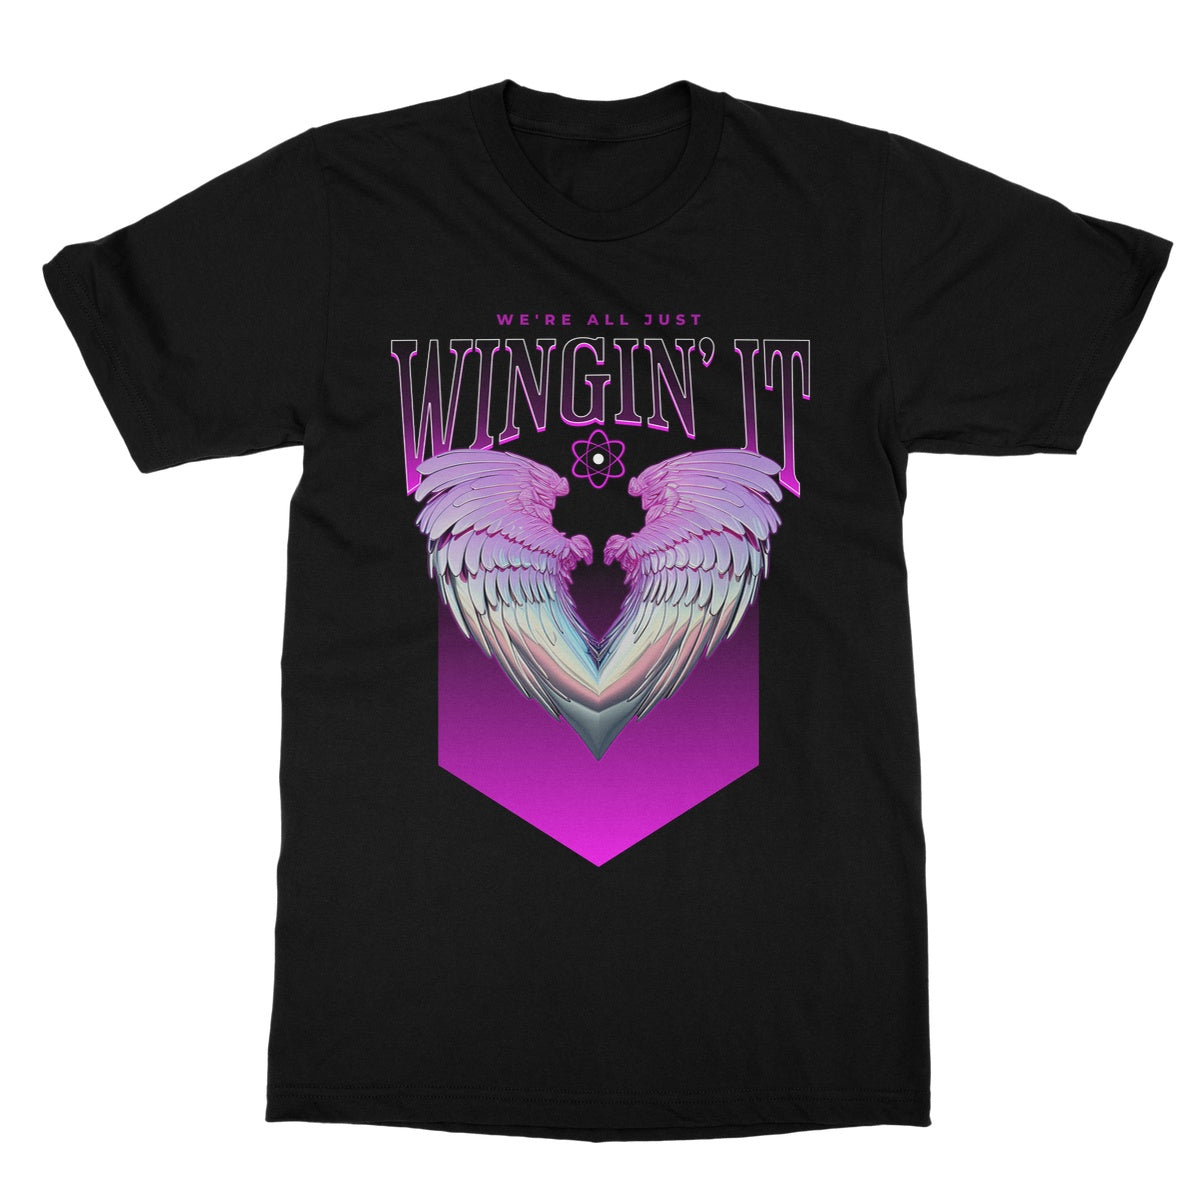 We are all just winging it t shirt black